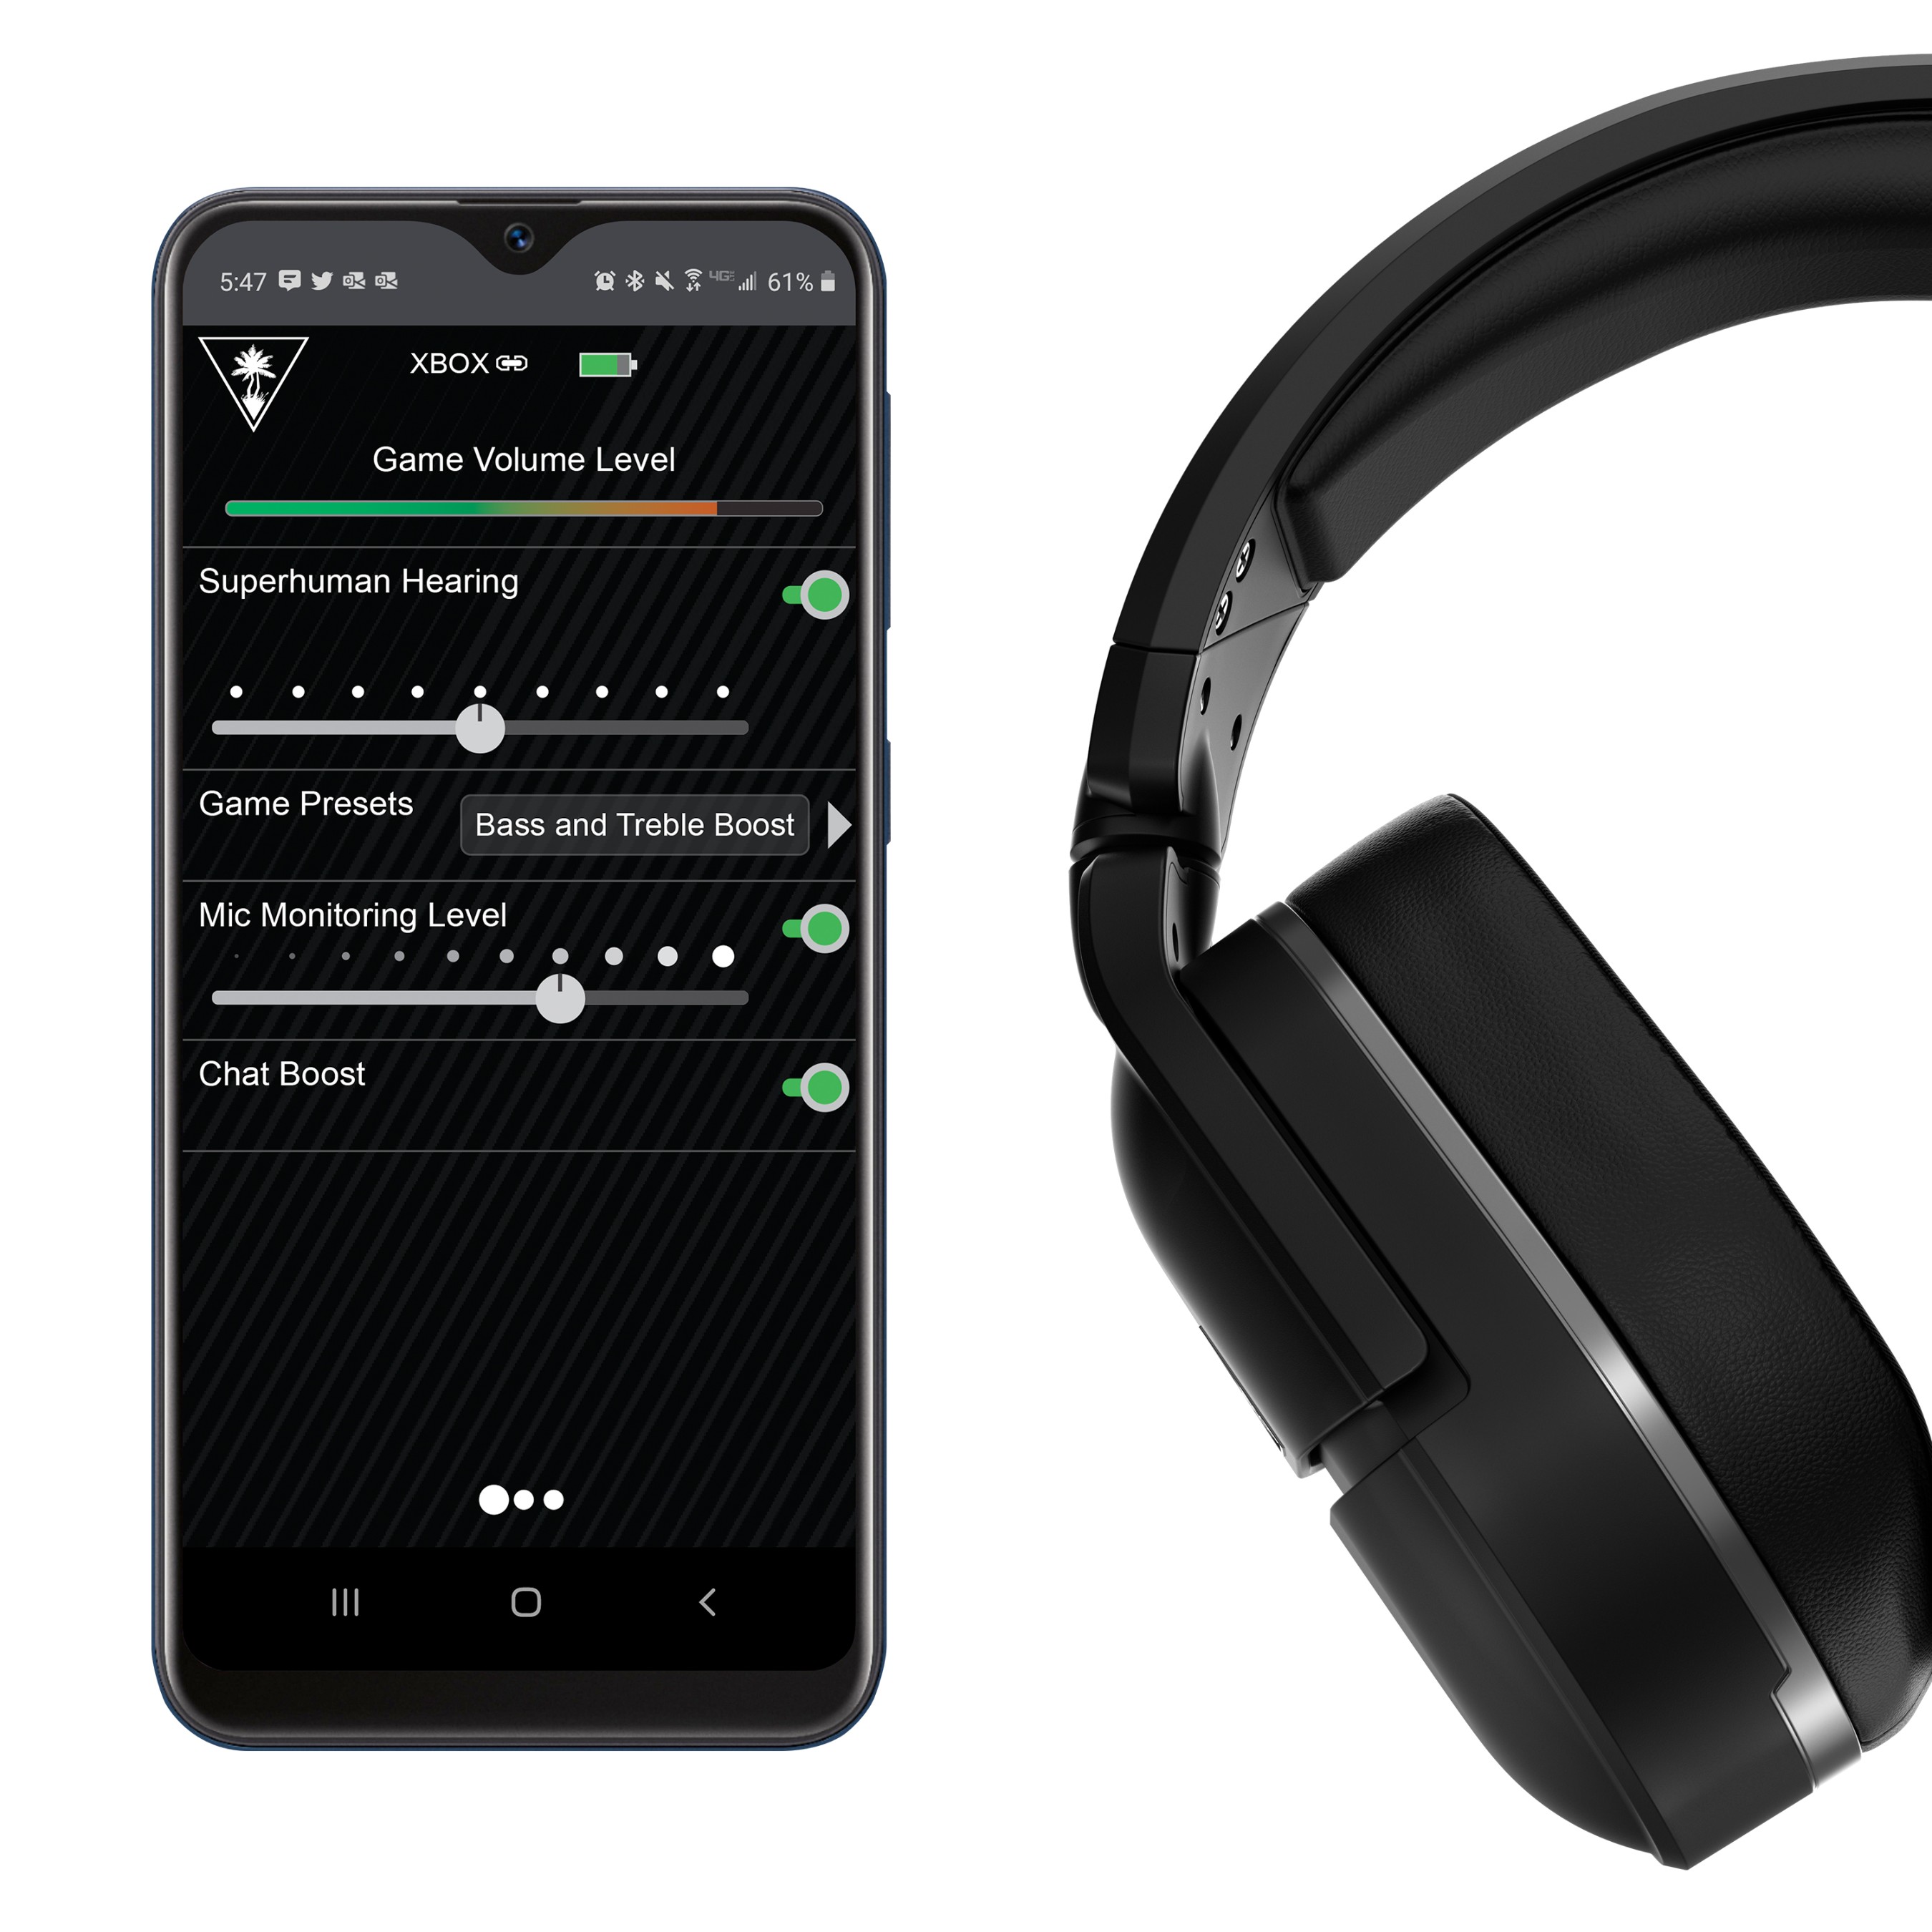 Listen to music or take calls while gaming, and connect to the mobile app via Bluetooth to adjust settings.